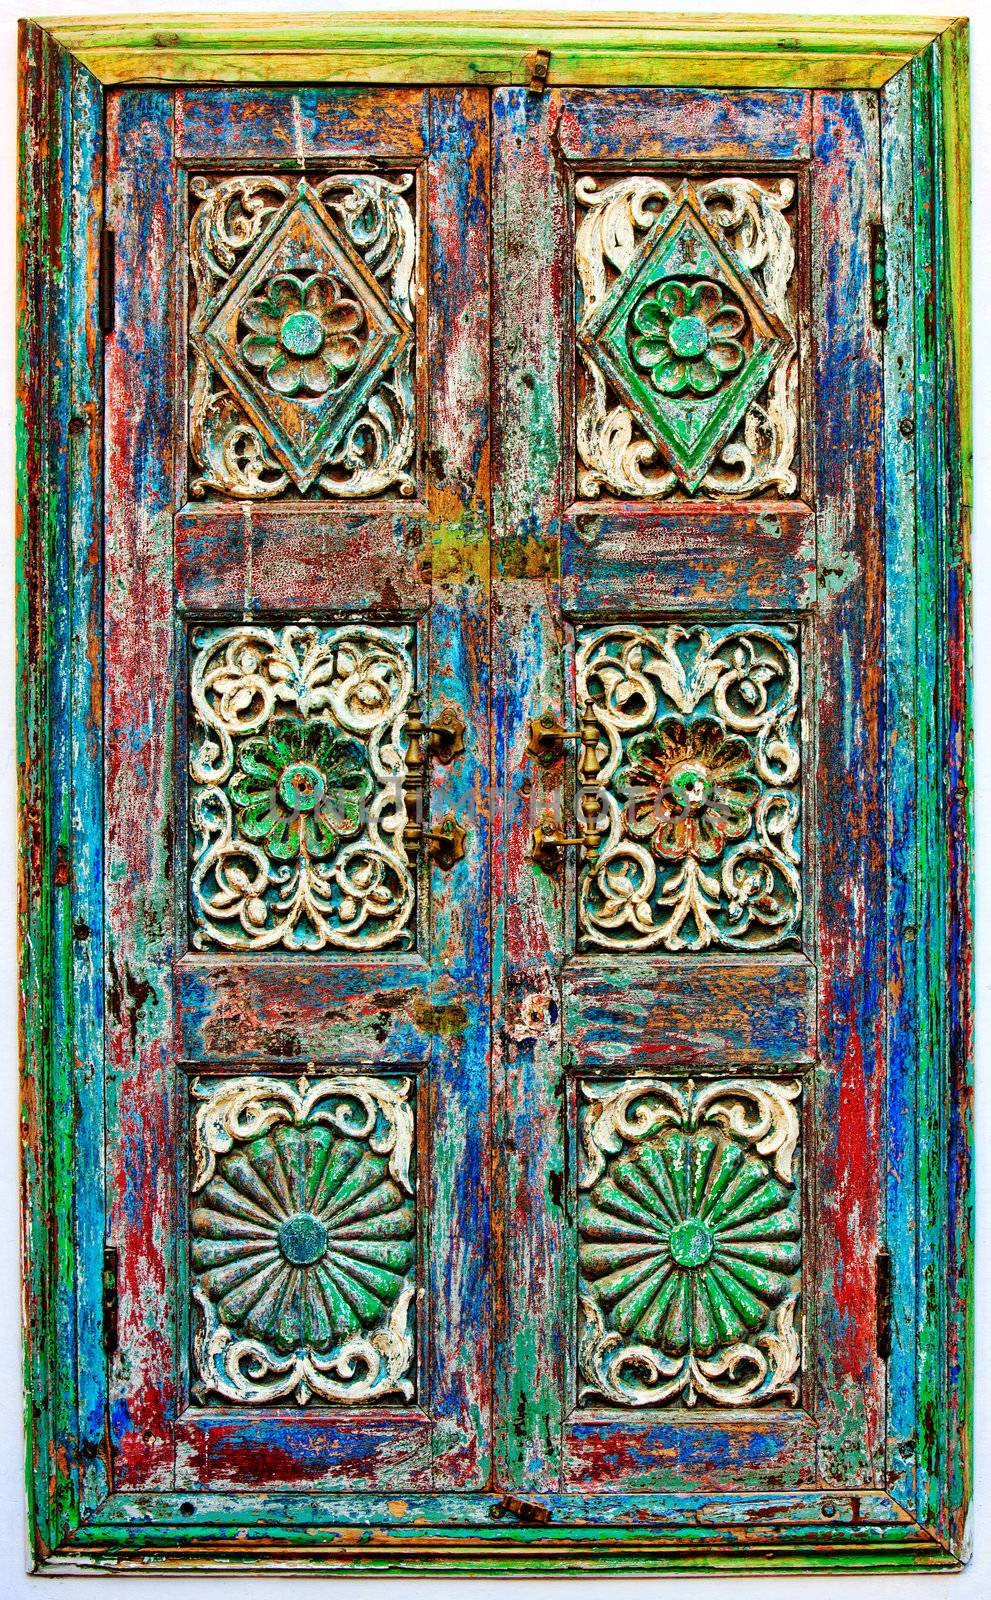 Old wooden shutters. Rajasthan,India, Asia.Background